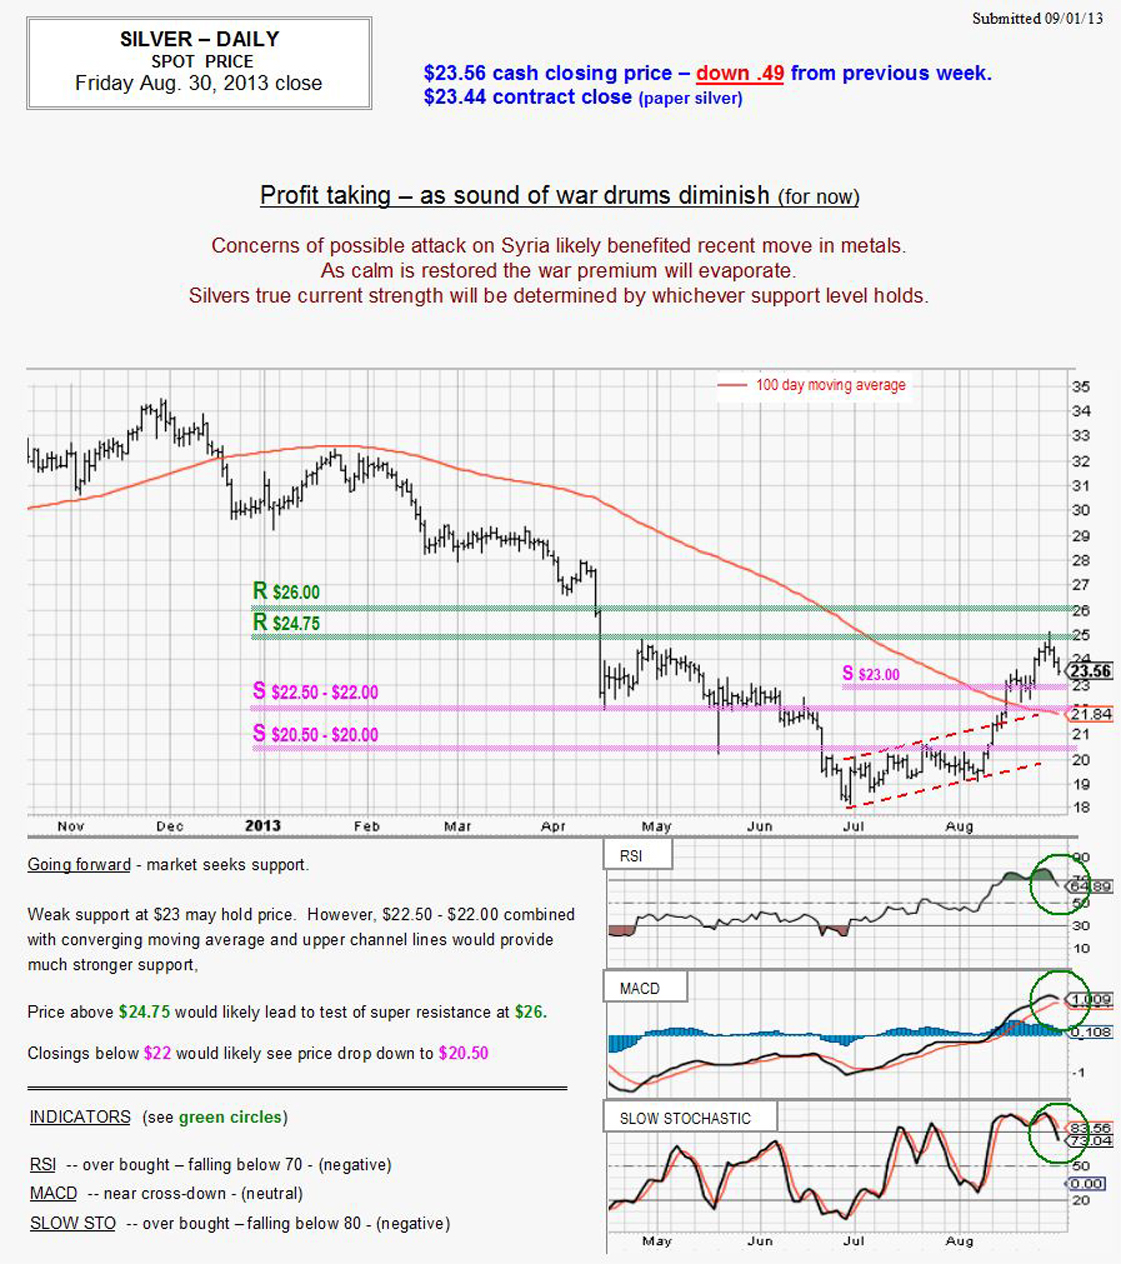 Aug 30, 2013 chart & commentary